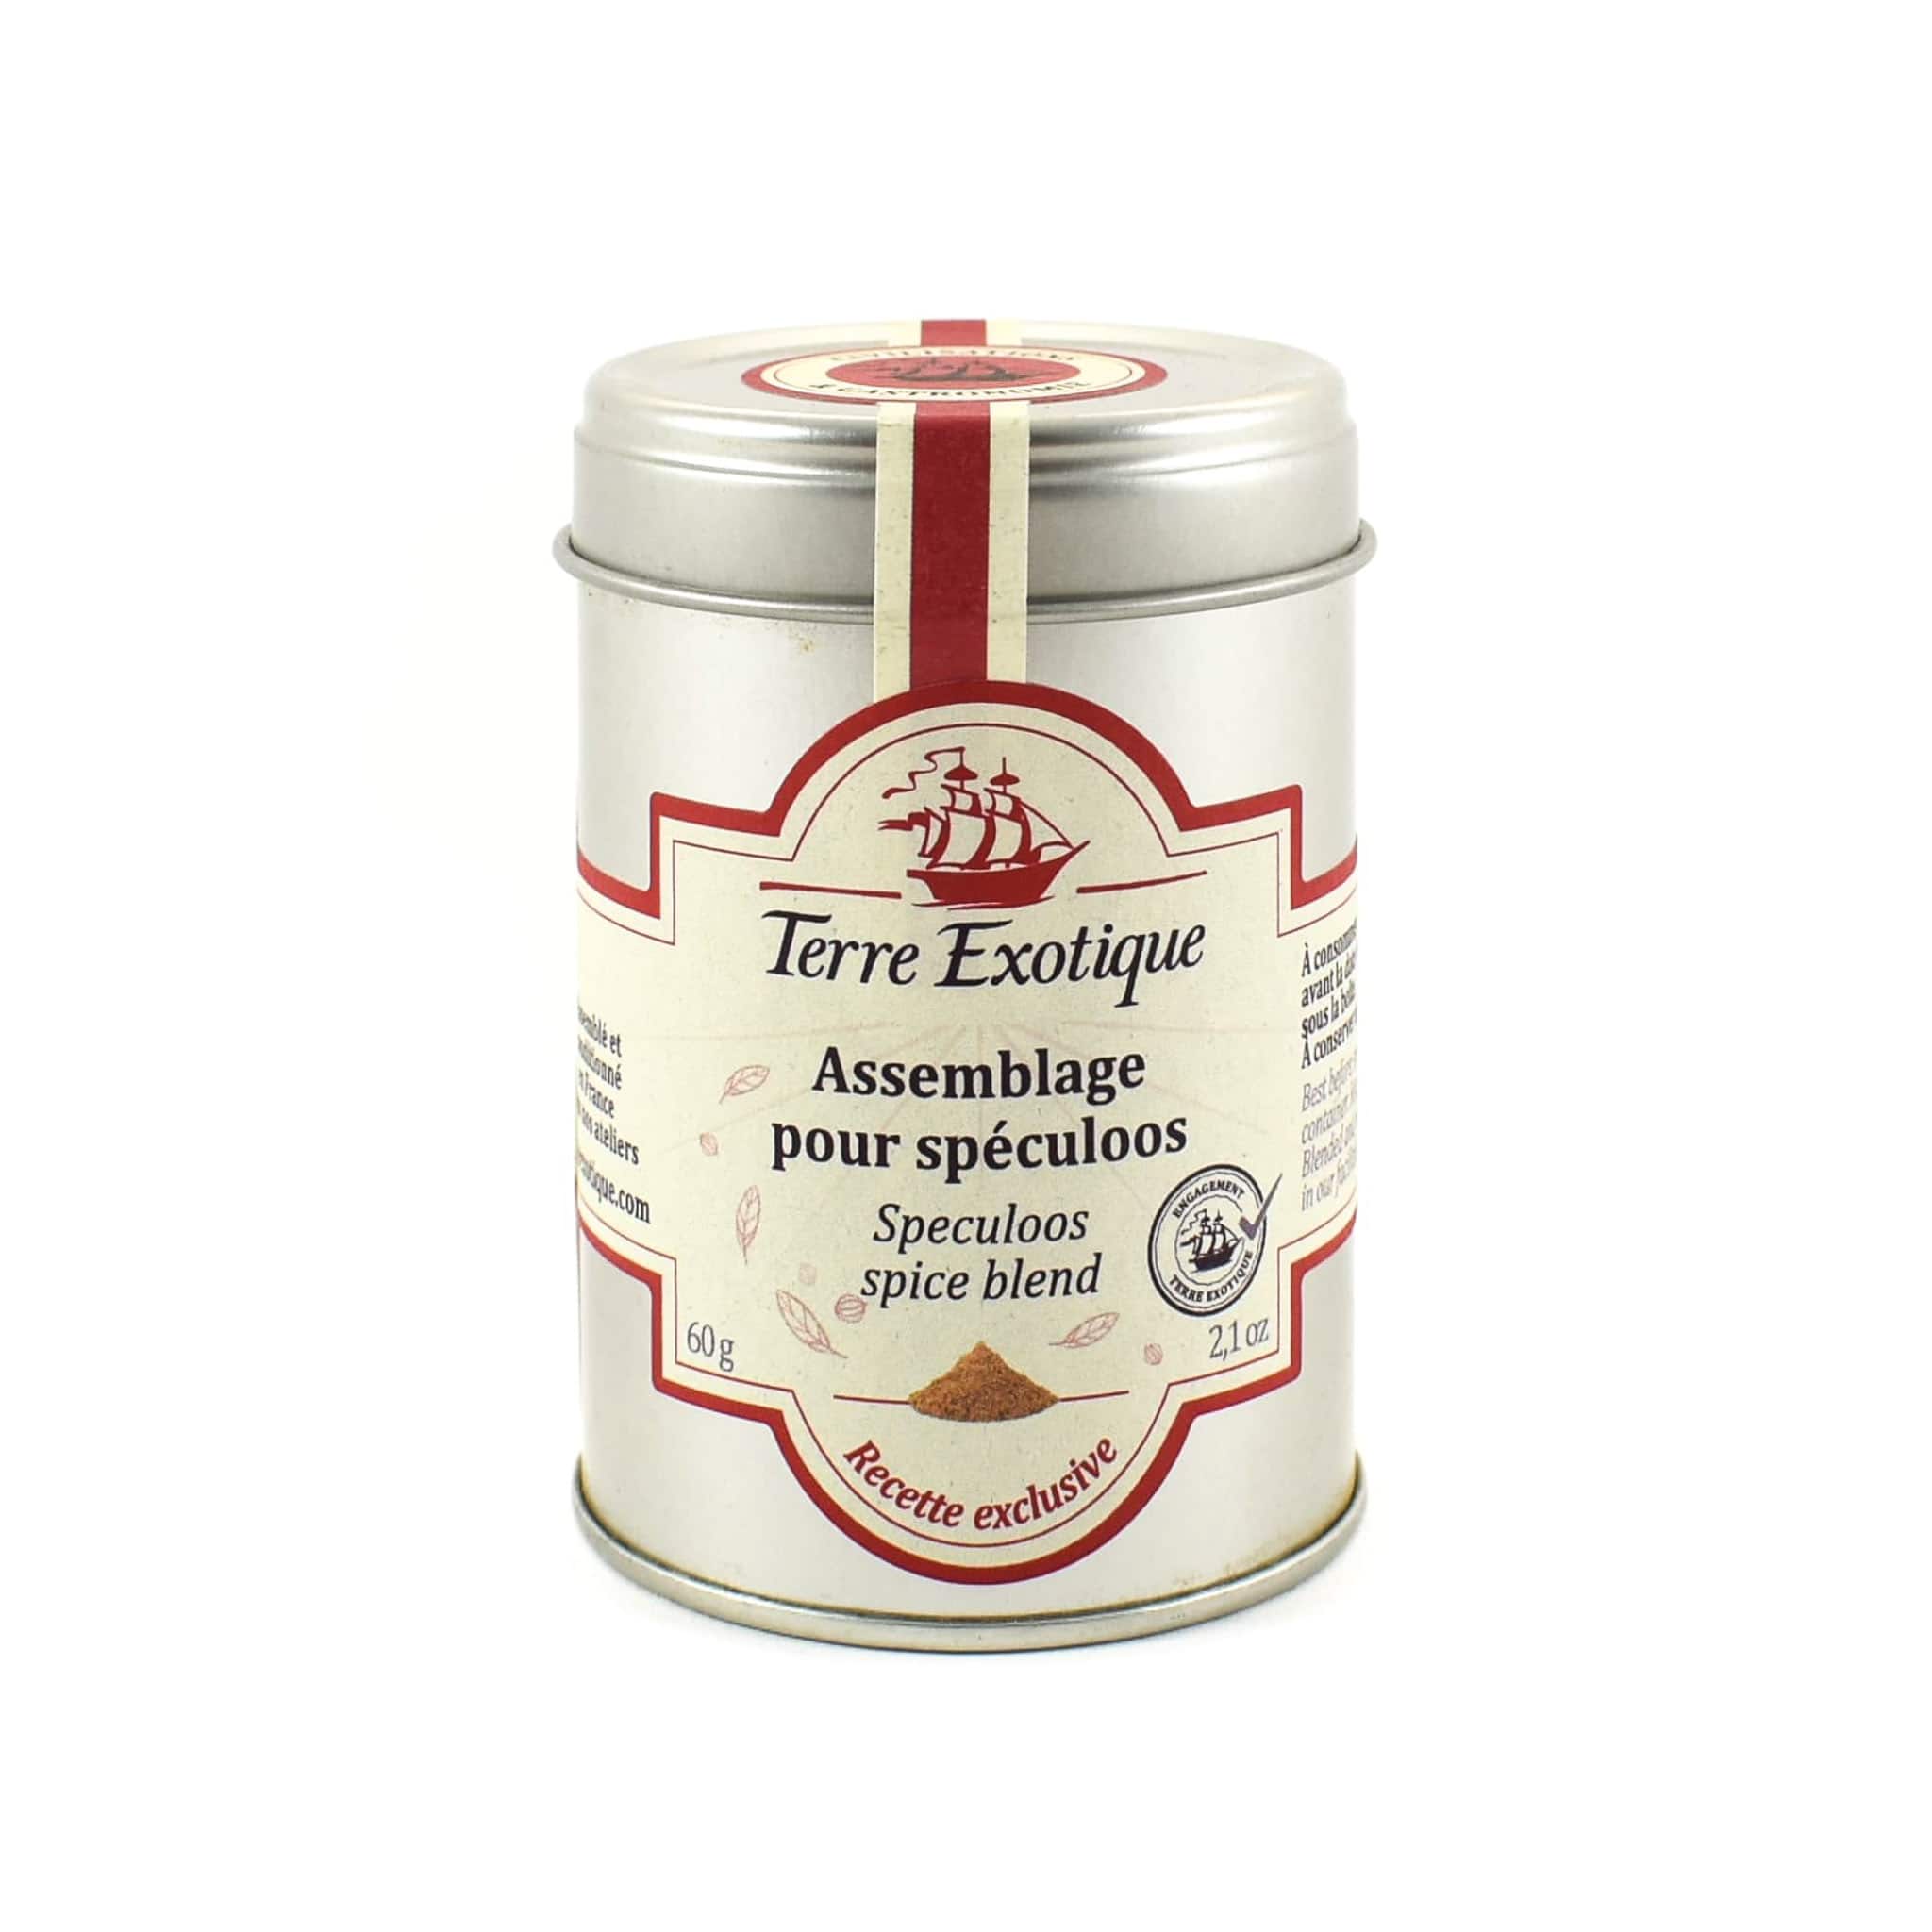 Terre Exotique Speculoos Spice Blend 60g